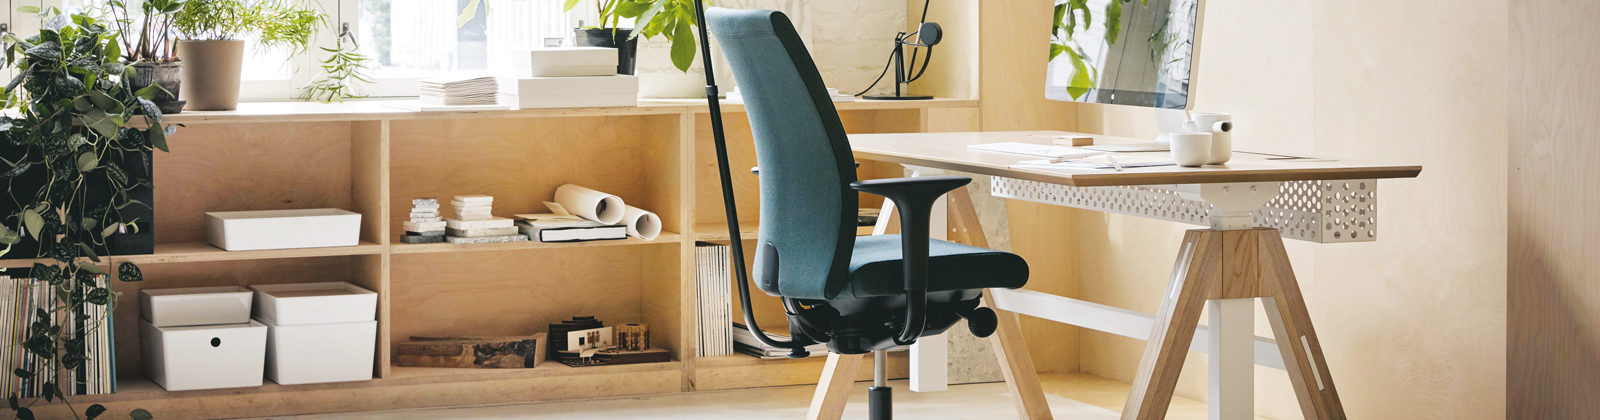 Creed task chair in green